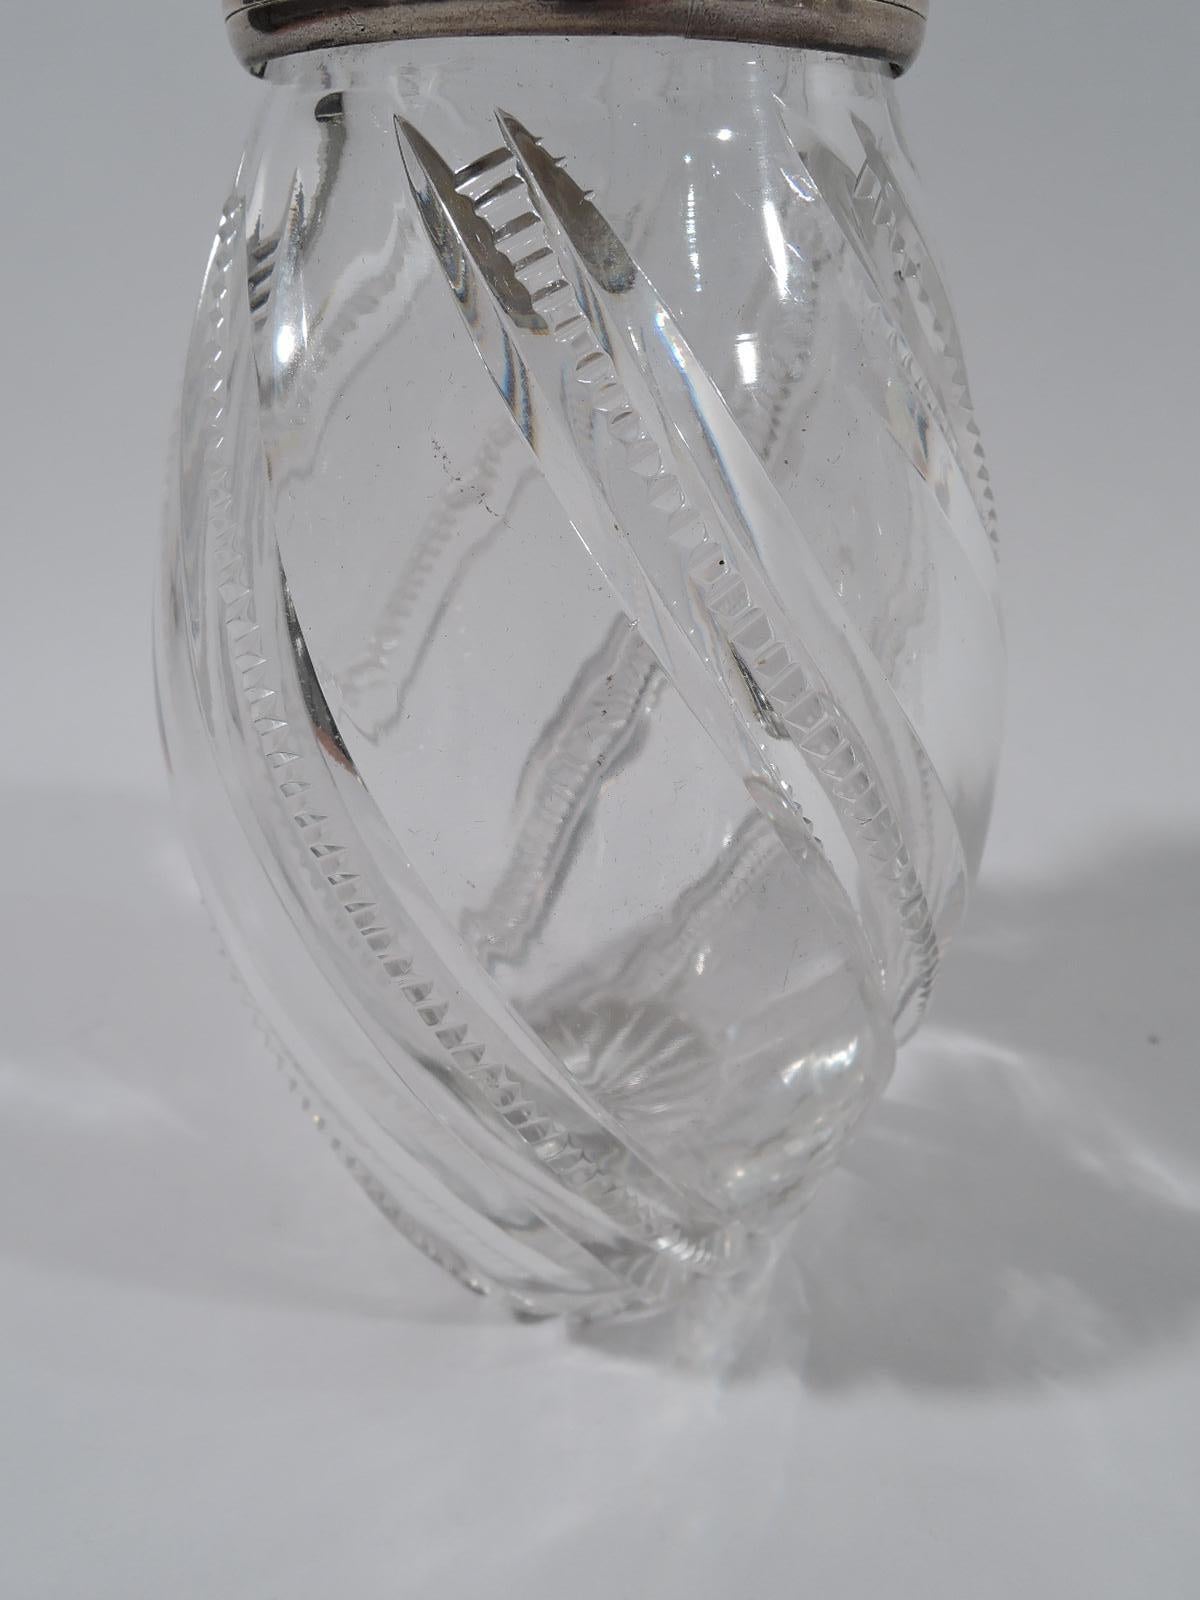 American Antique Baltimore Cut-Glass and Sterling Silver Sugar Caster